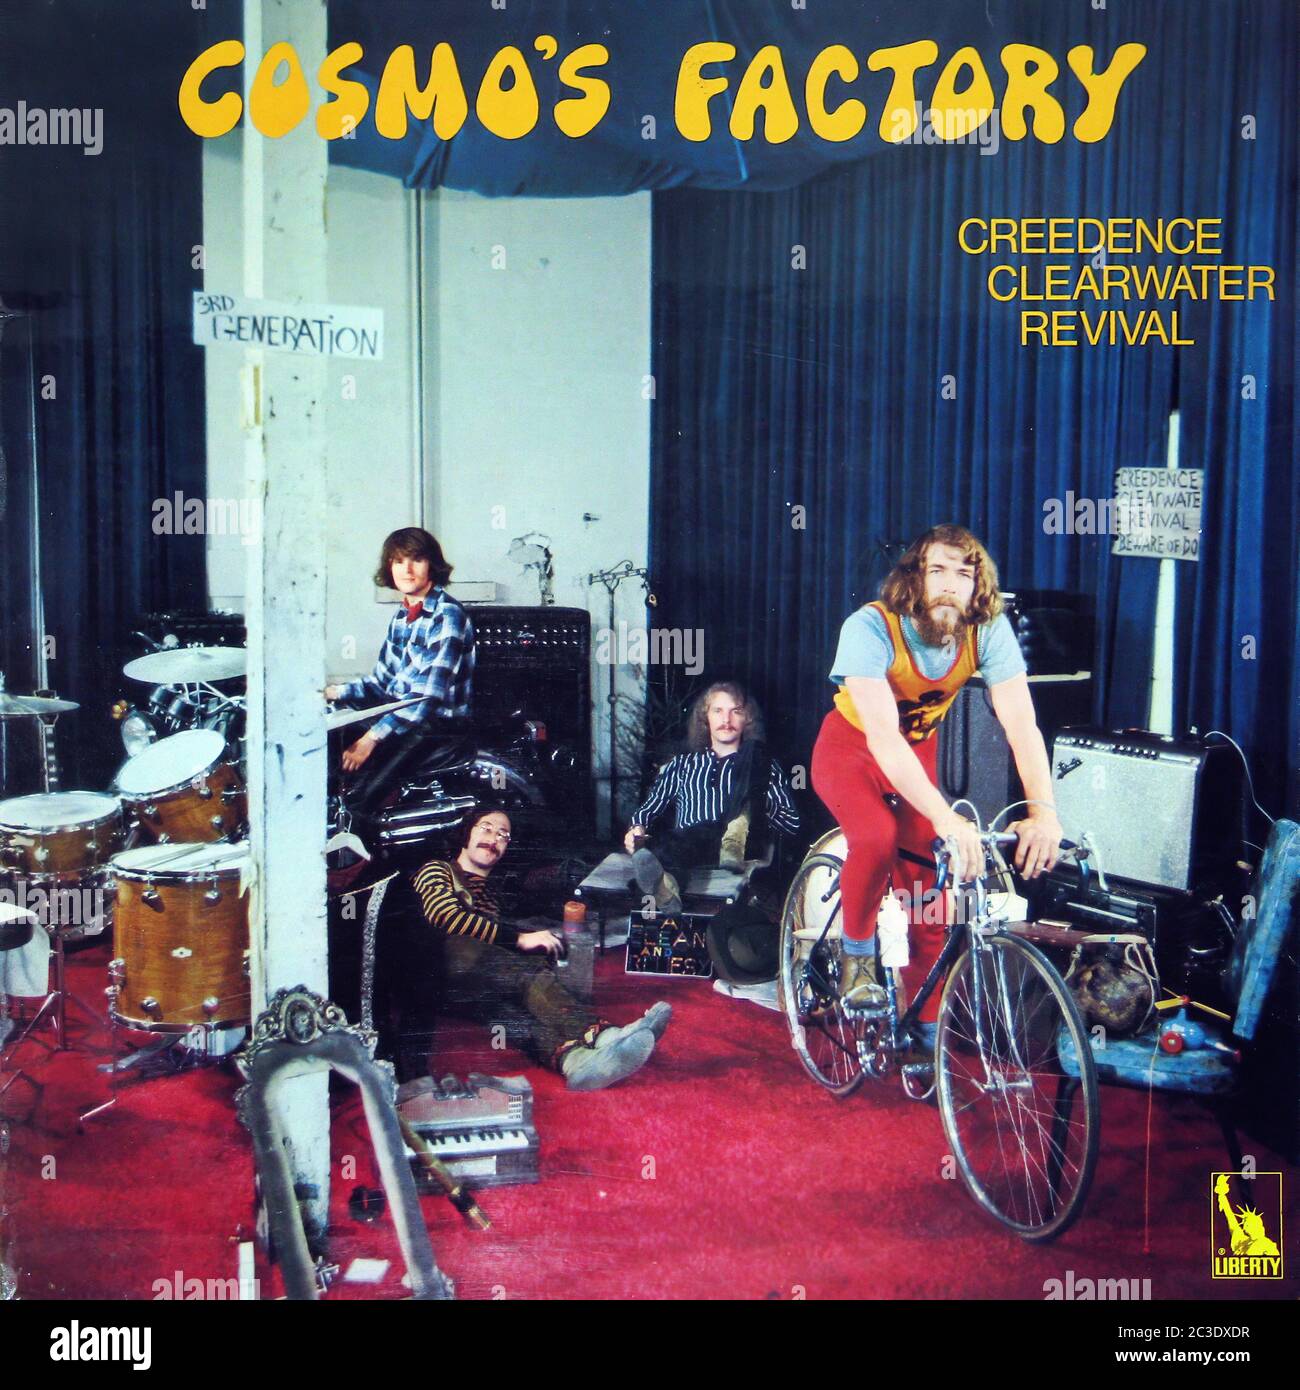 Creedence Clearwater Revival Cosmo's Factory Liberty LBS 83388  - Vintage 12'' vinyl LP 02 Cover Stock Photo